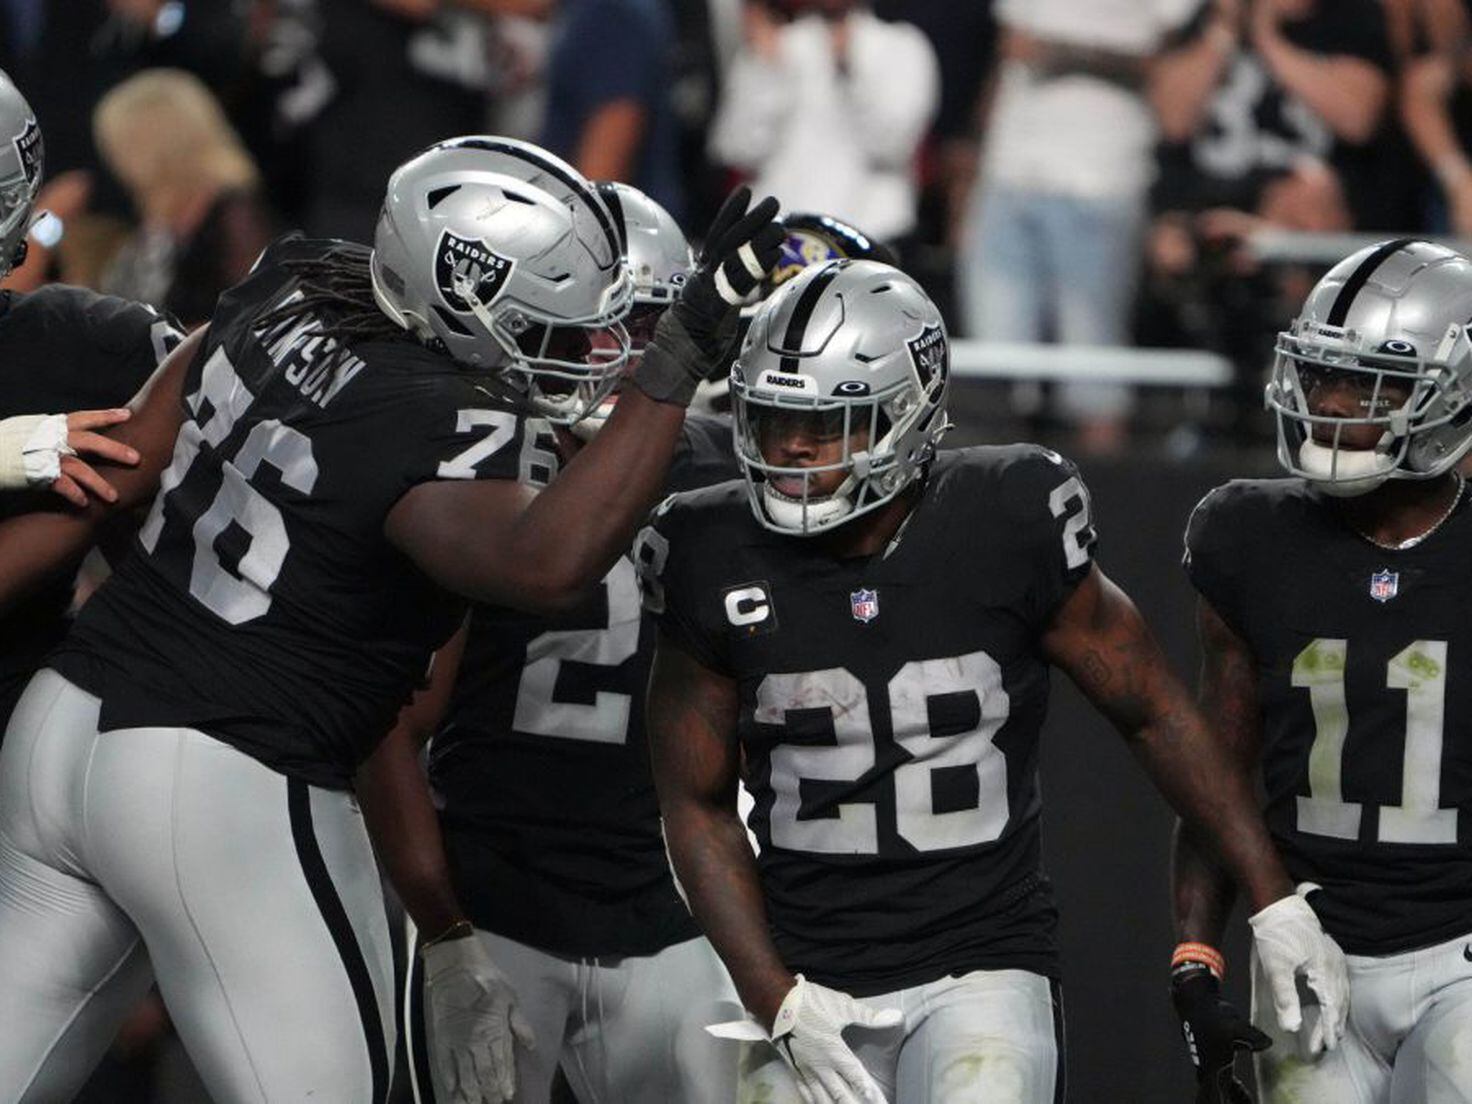 Quick Snap: Raiders drop road game to New Orleans Saints